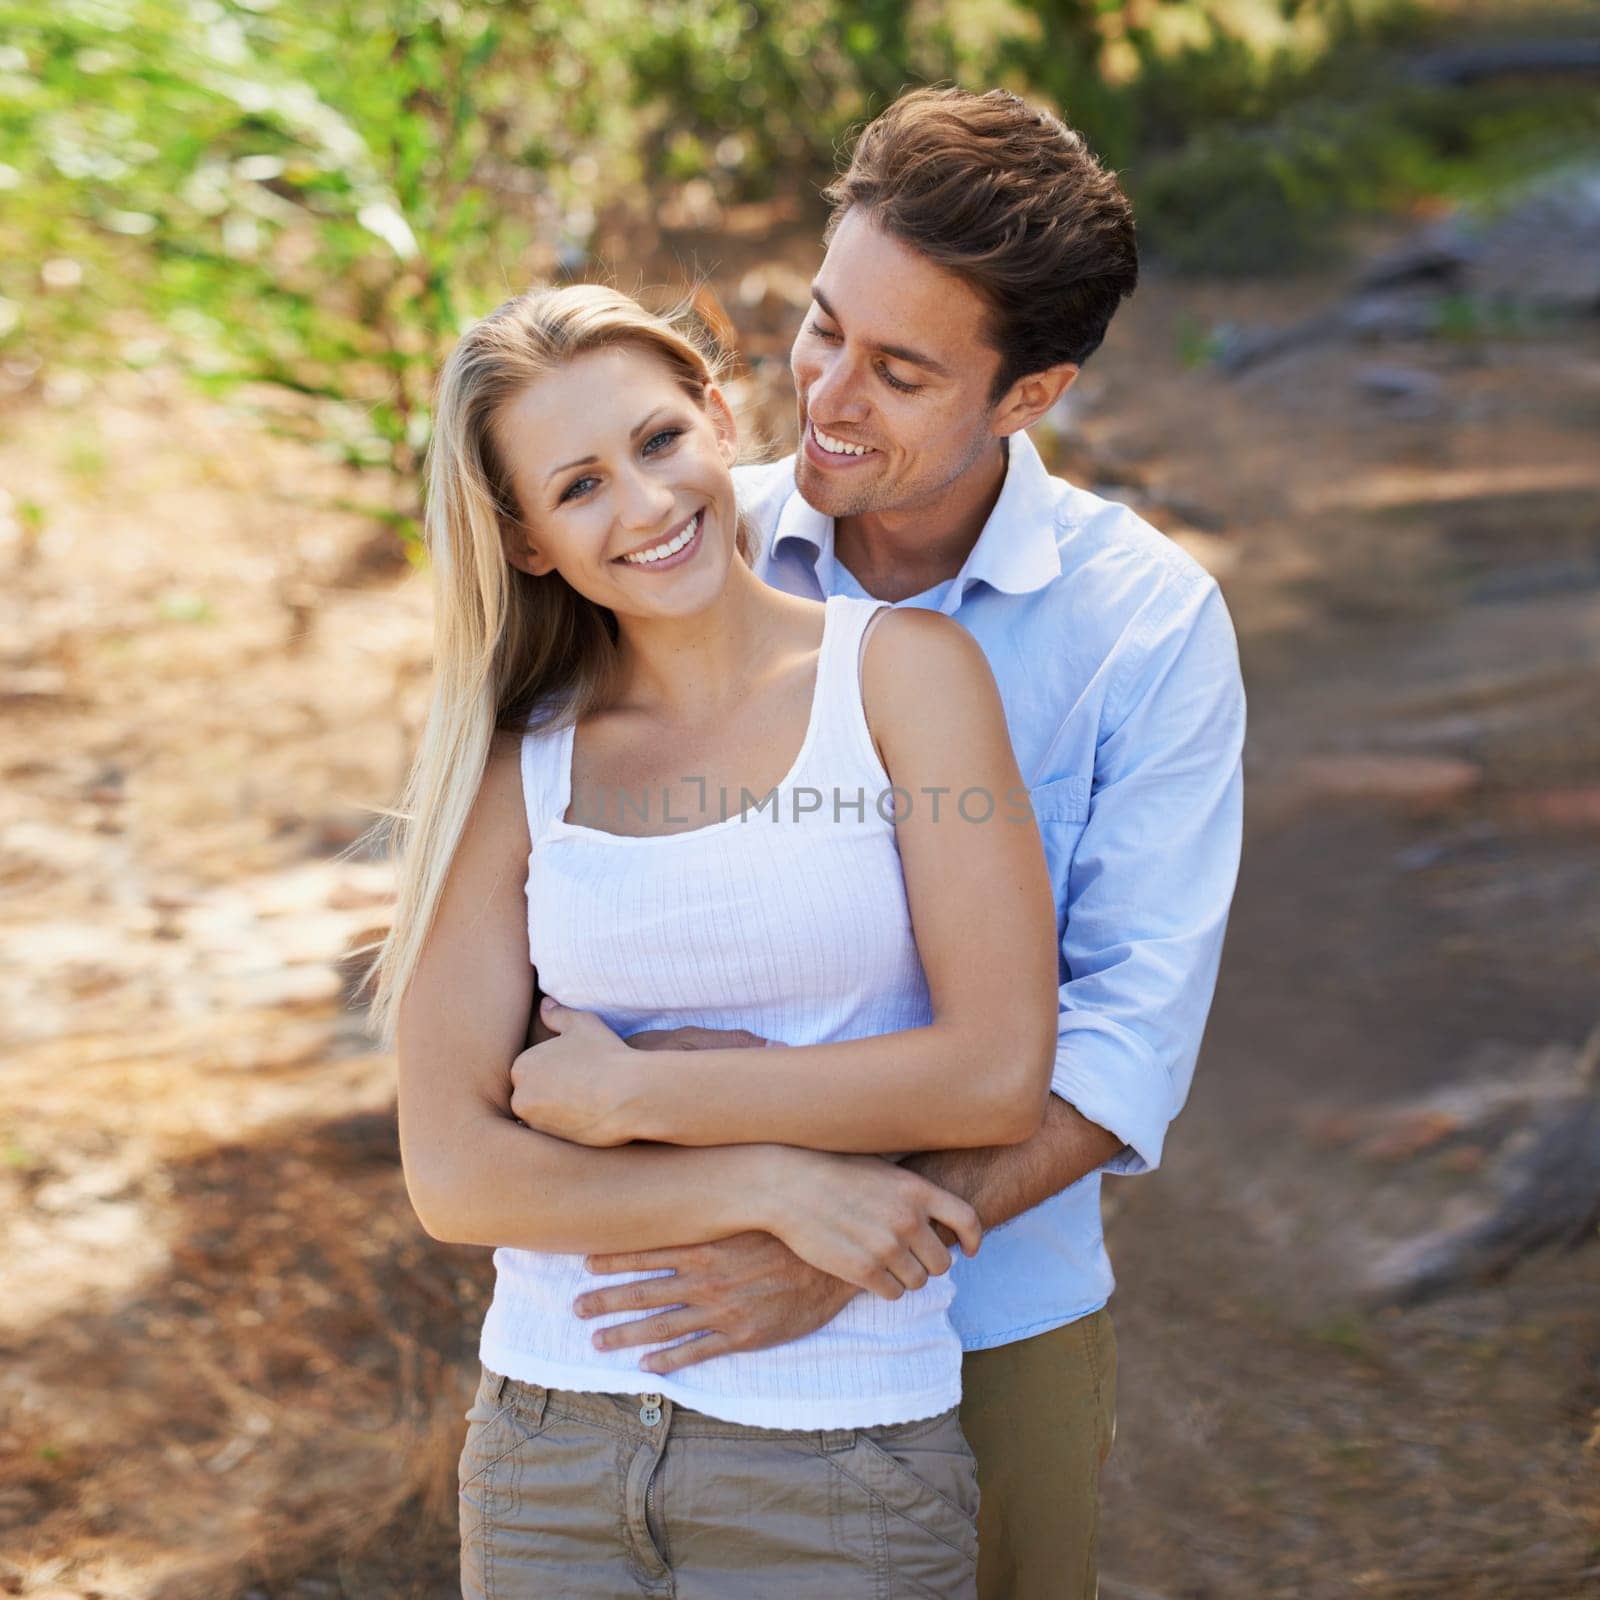 Nature portrait, love and happy couple hug for support, romantic care and relationship security with marriage partner. Embrace, wellness and relax outdoor man, woman or people smile for forest date.